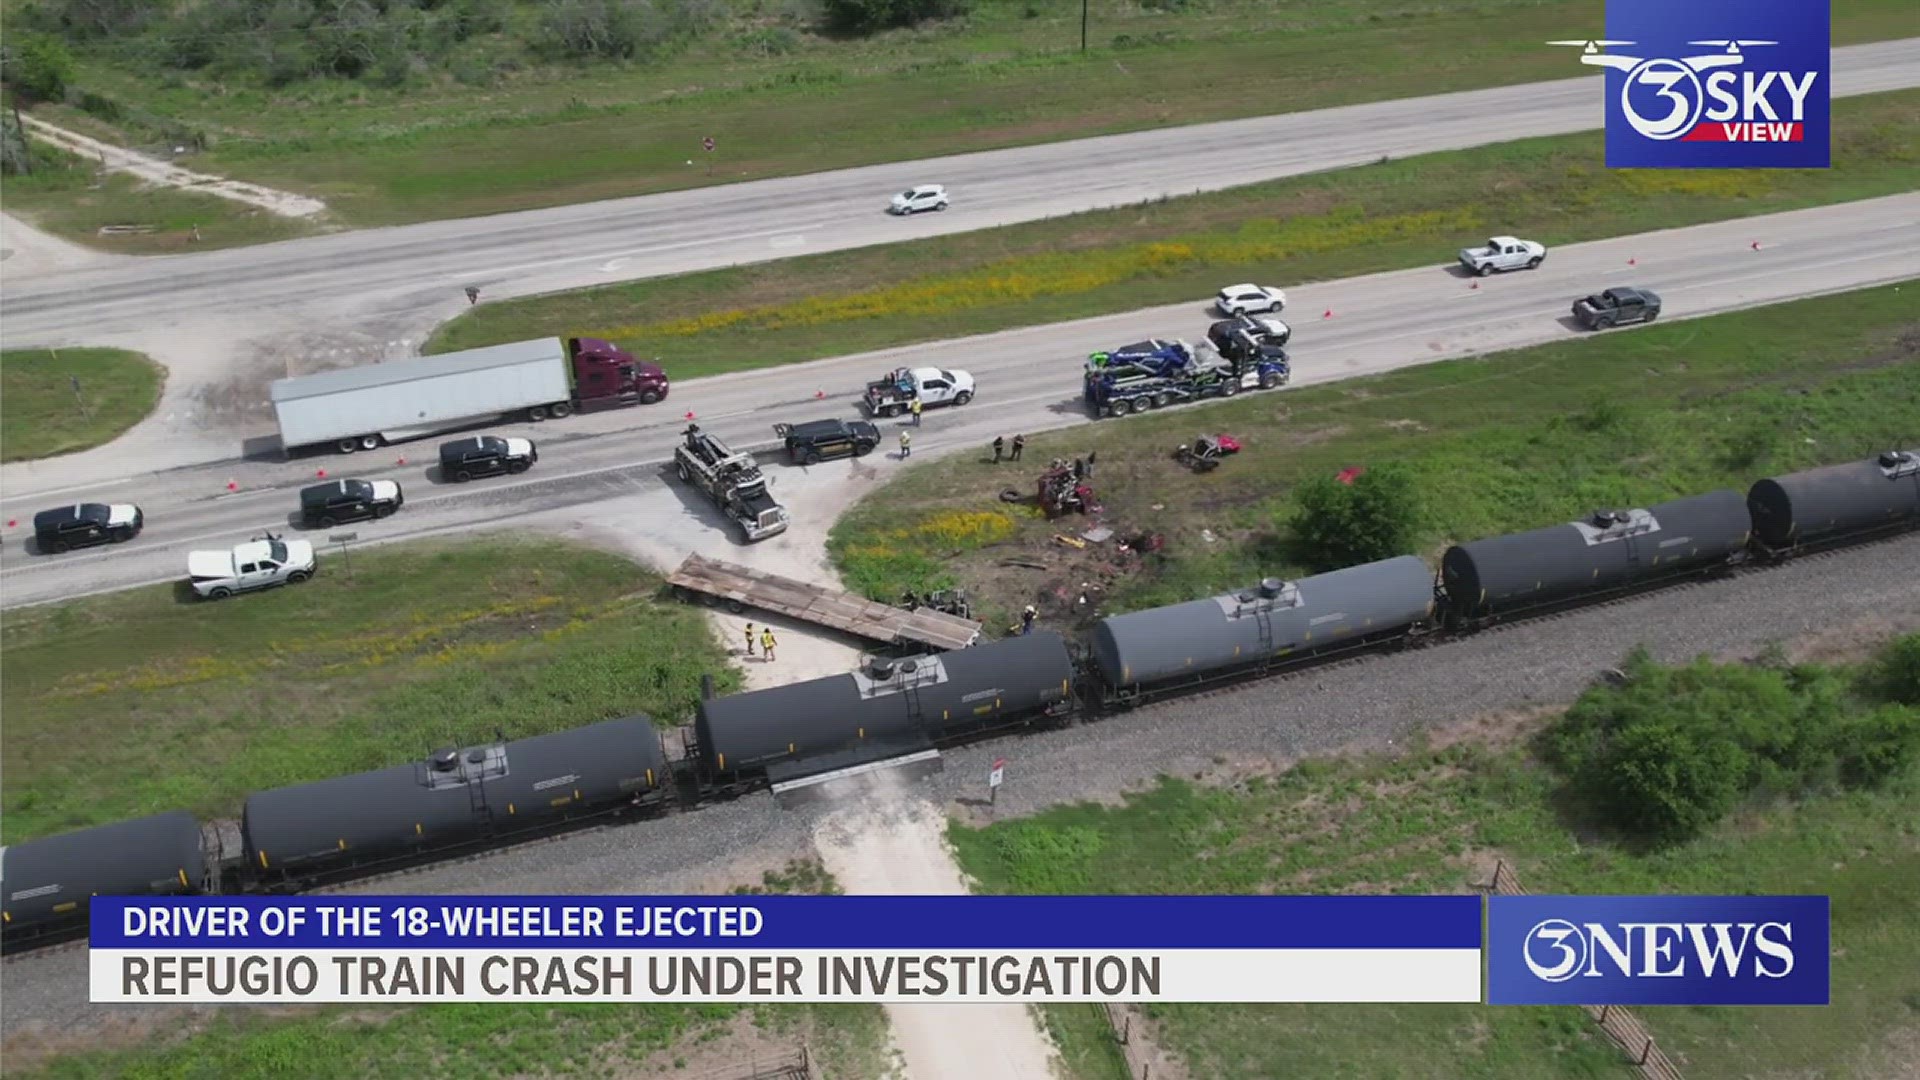 Sheriff Raul Gonzales told 3NEWS the driver of the truck was not wearing a seatbelt.